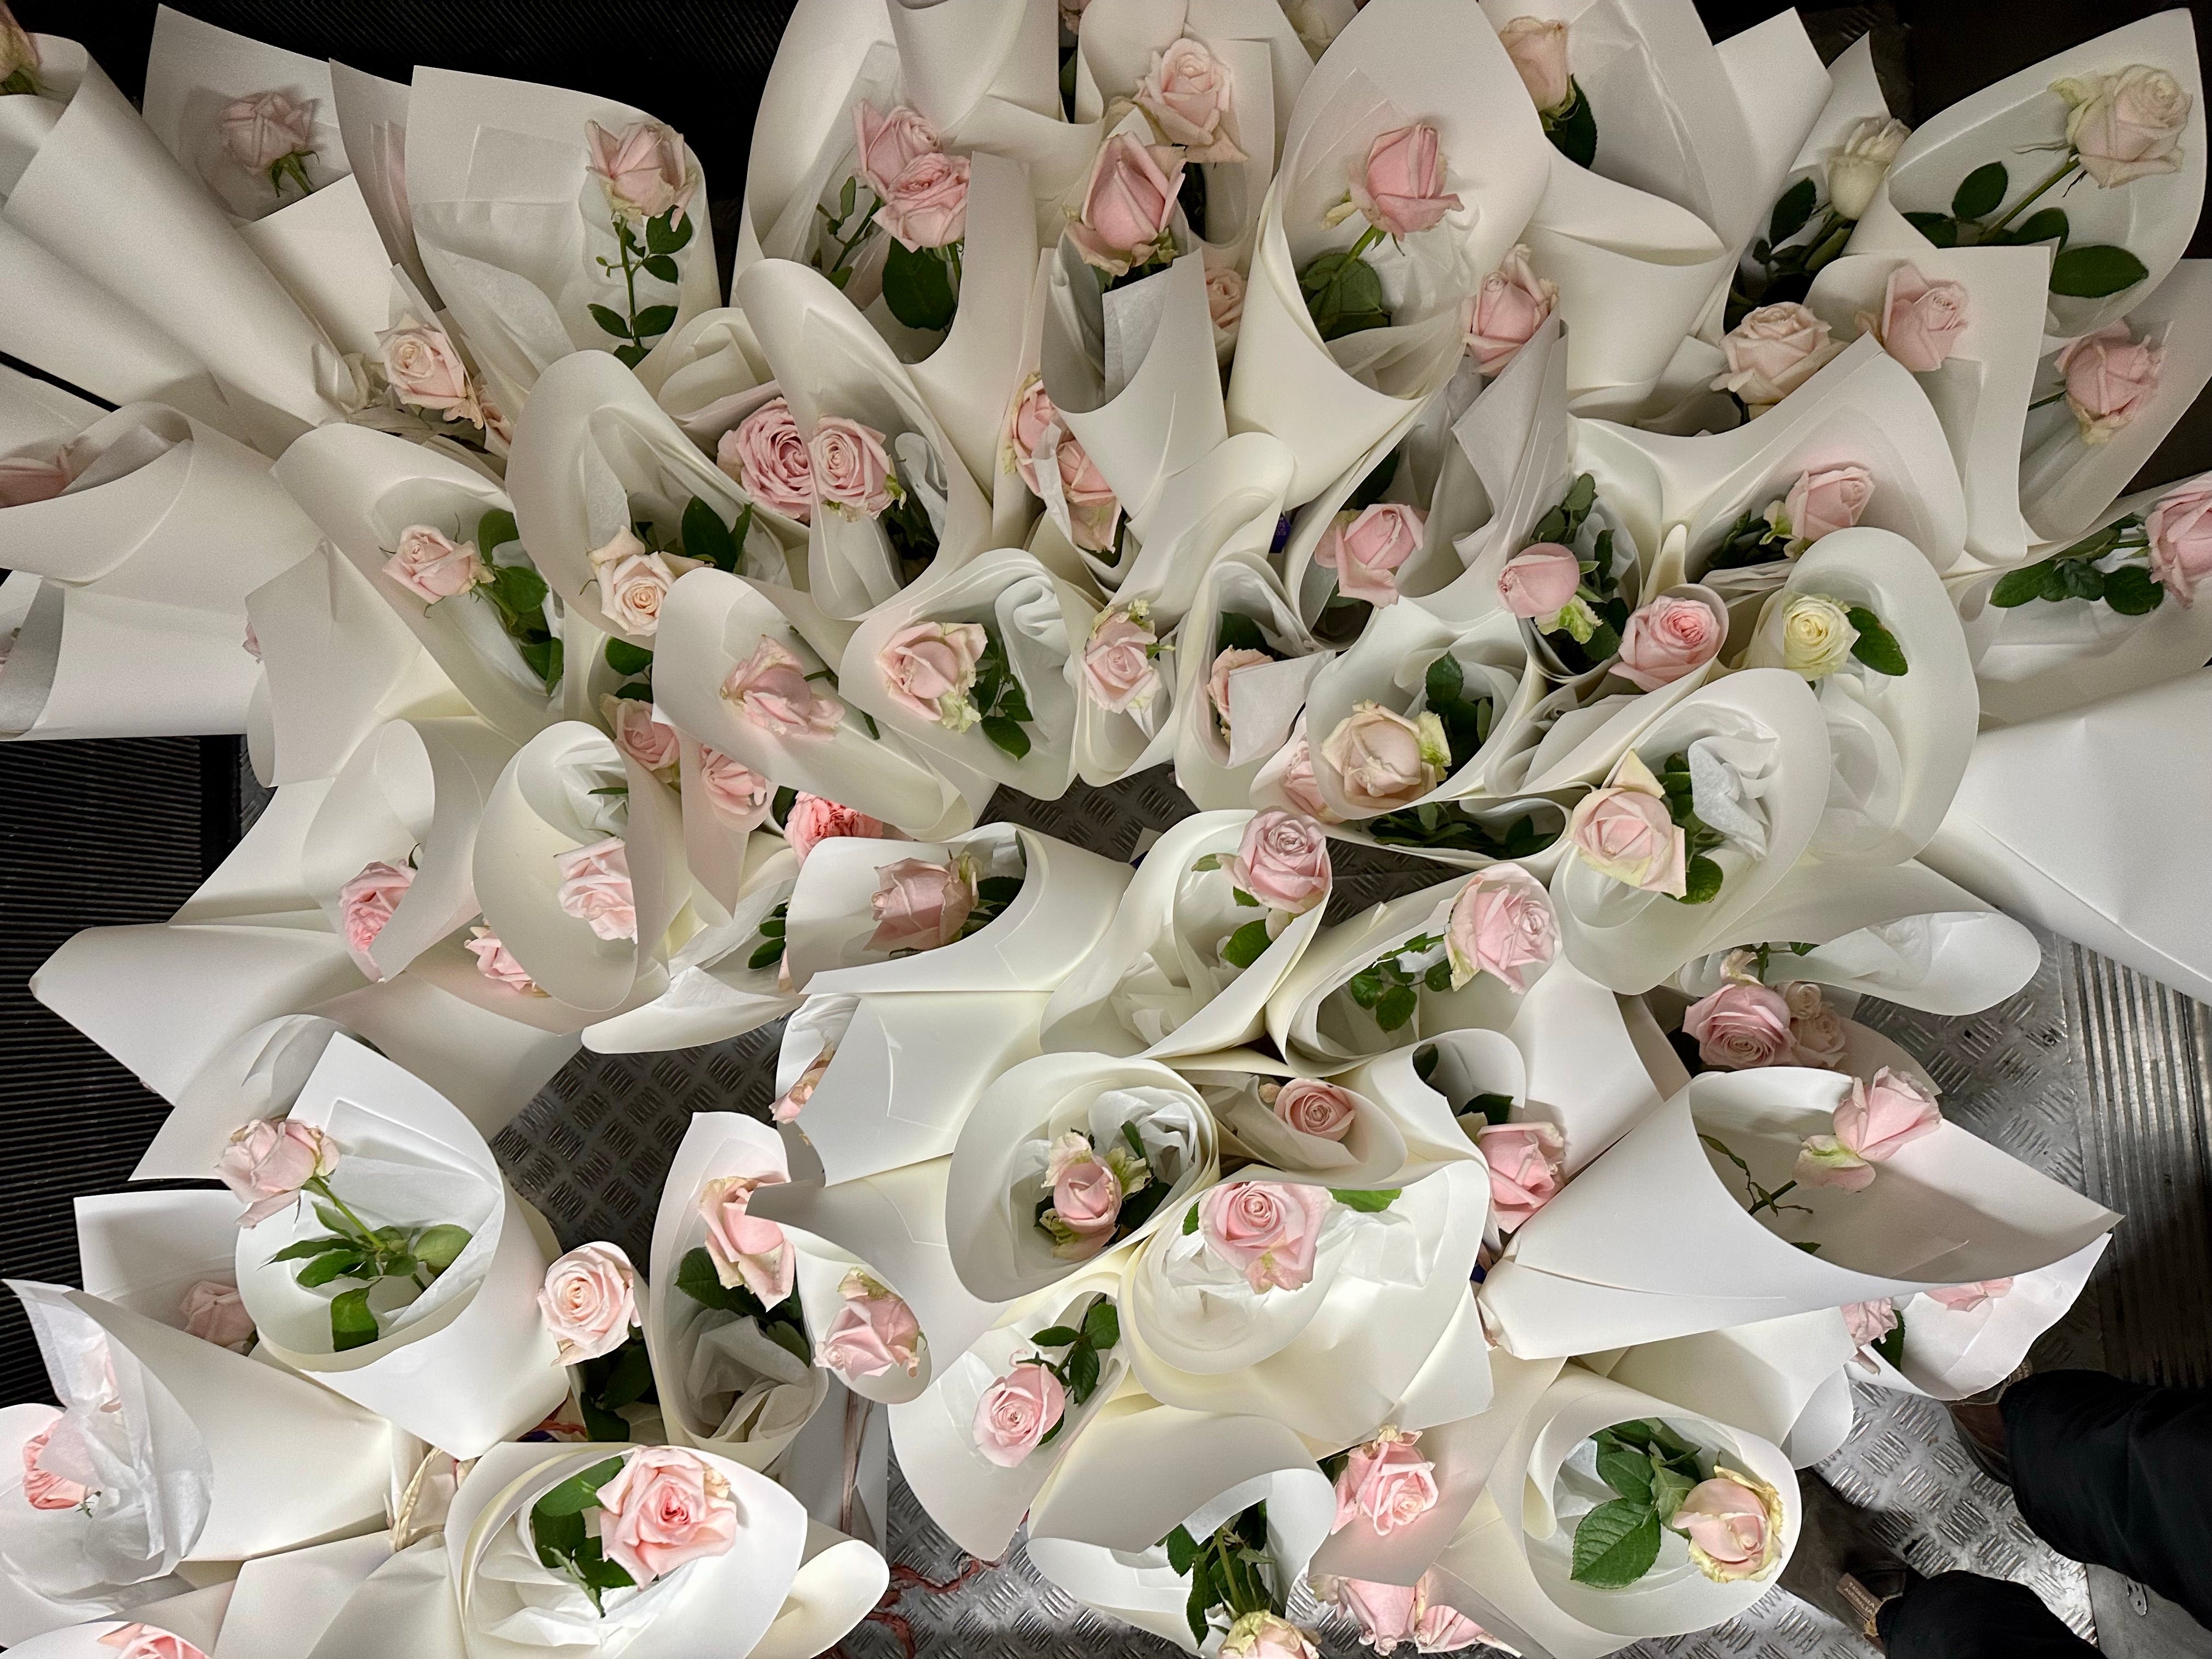 Florada donates 100 locally grown roses to The Kids' Cancer Project to help raise funds for cancer research.